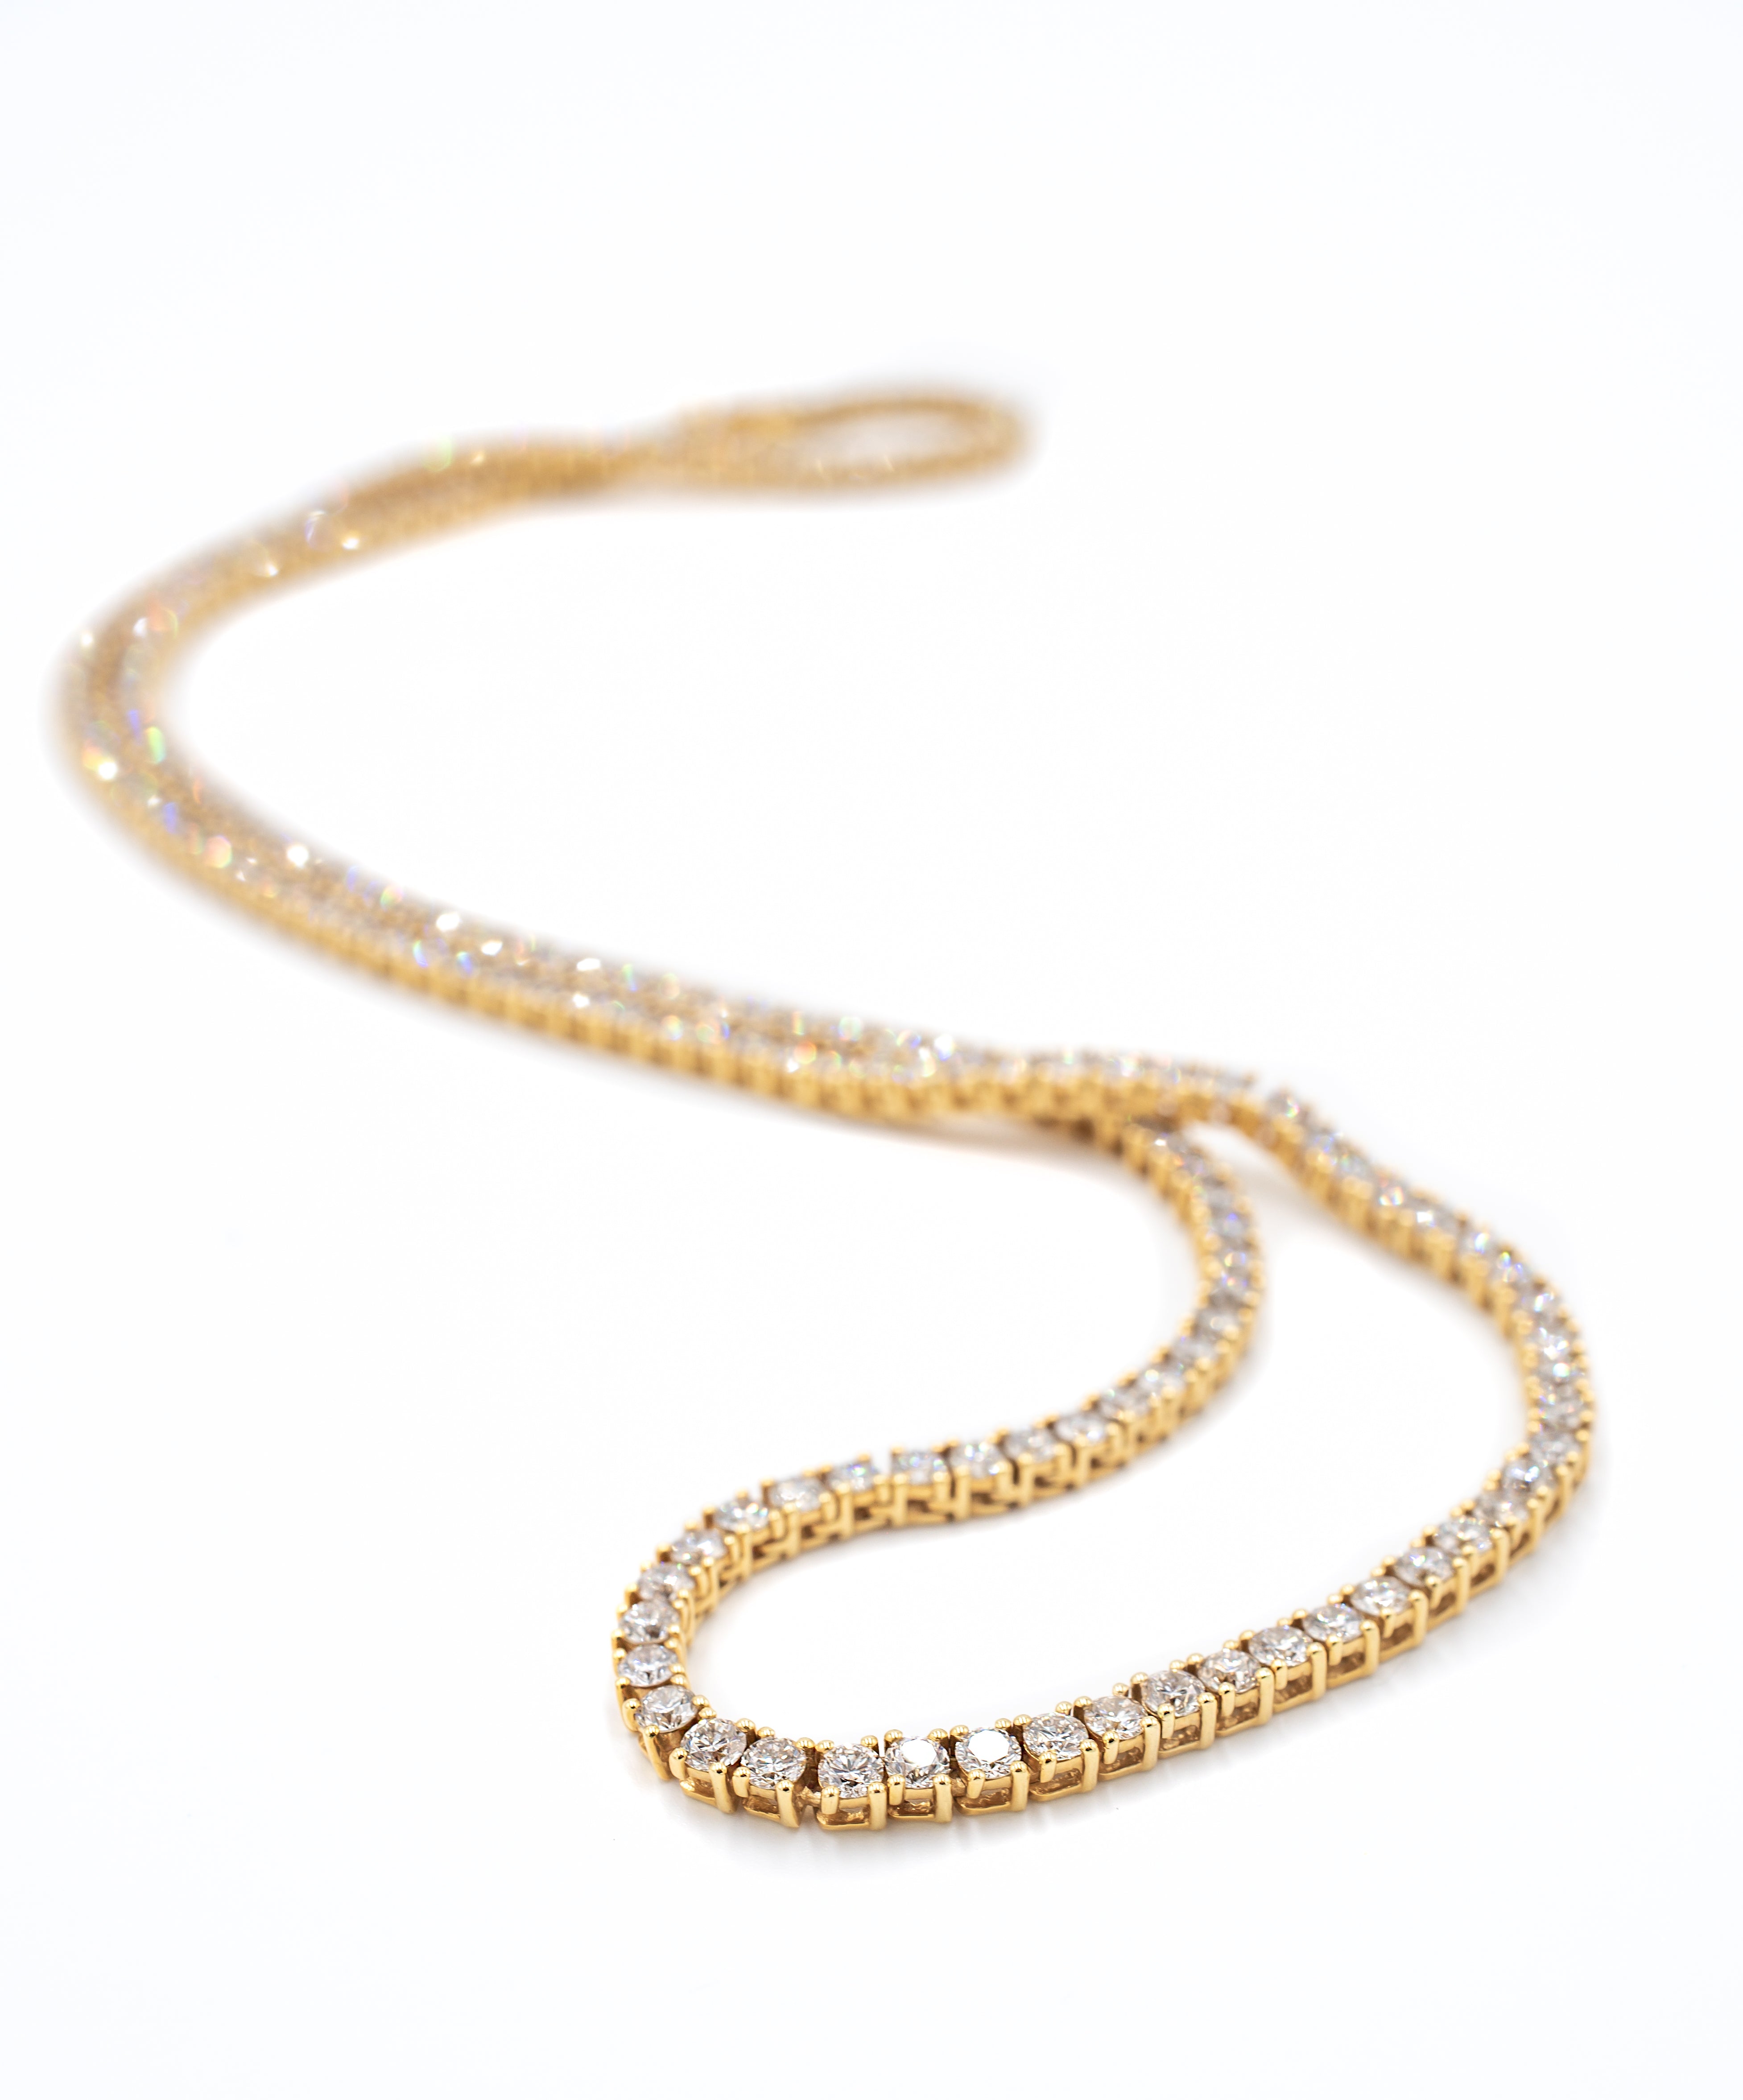 22.79 ctw 14k Yellow Gold Tennis Necklace